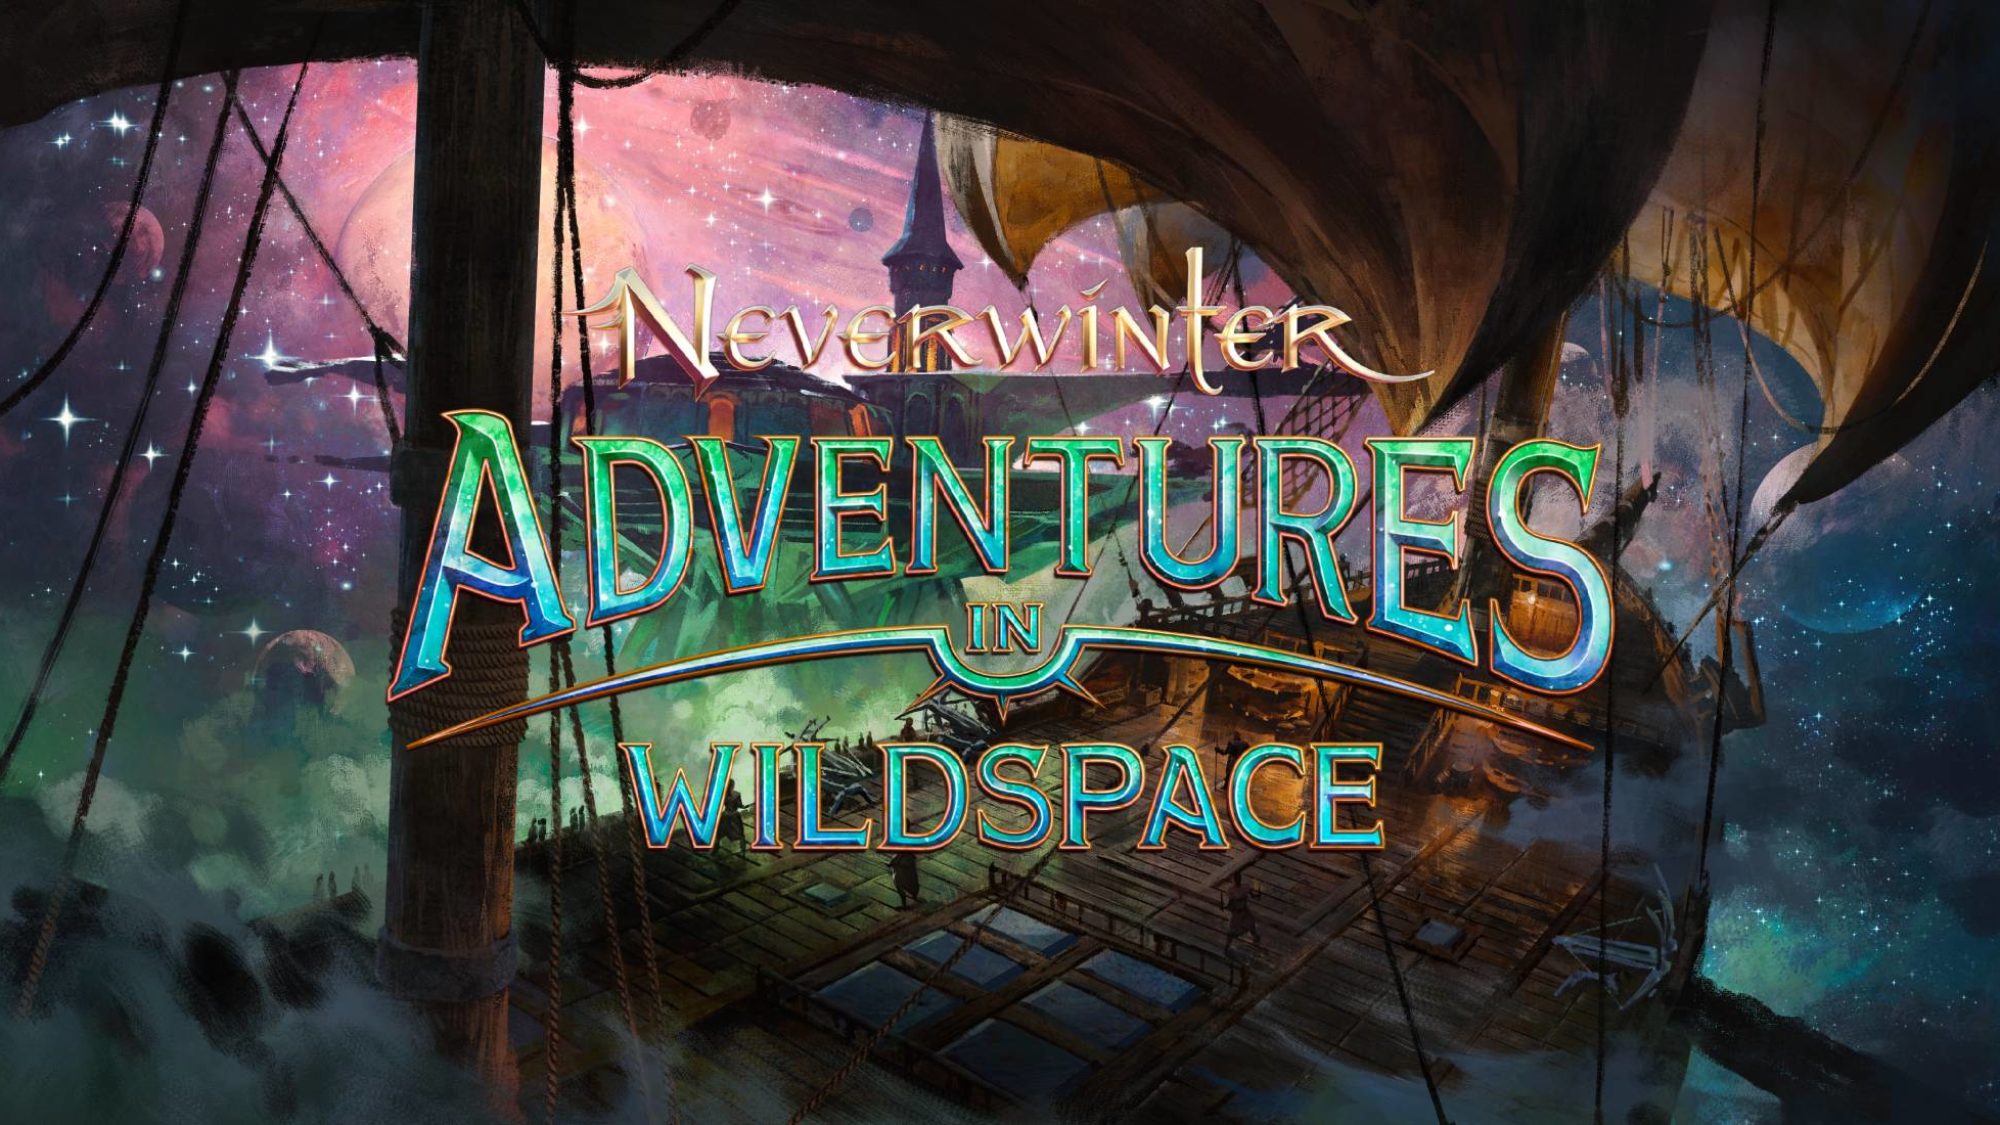 Neverwinter's Latest Expansion "Adventures in Wildspace" Introduces "The Imperial Citadel" and New Heroic Encounters 11